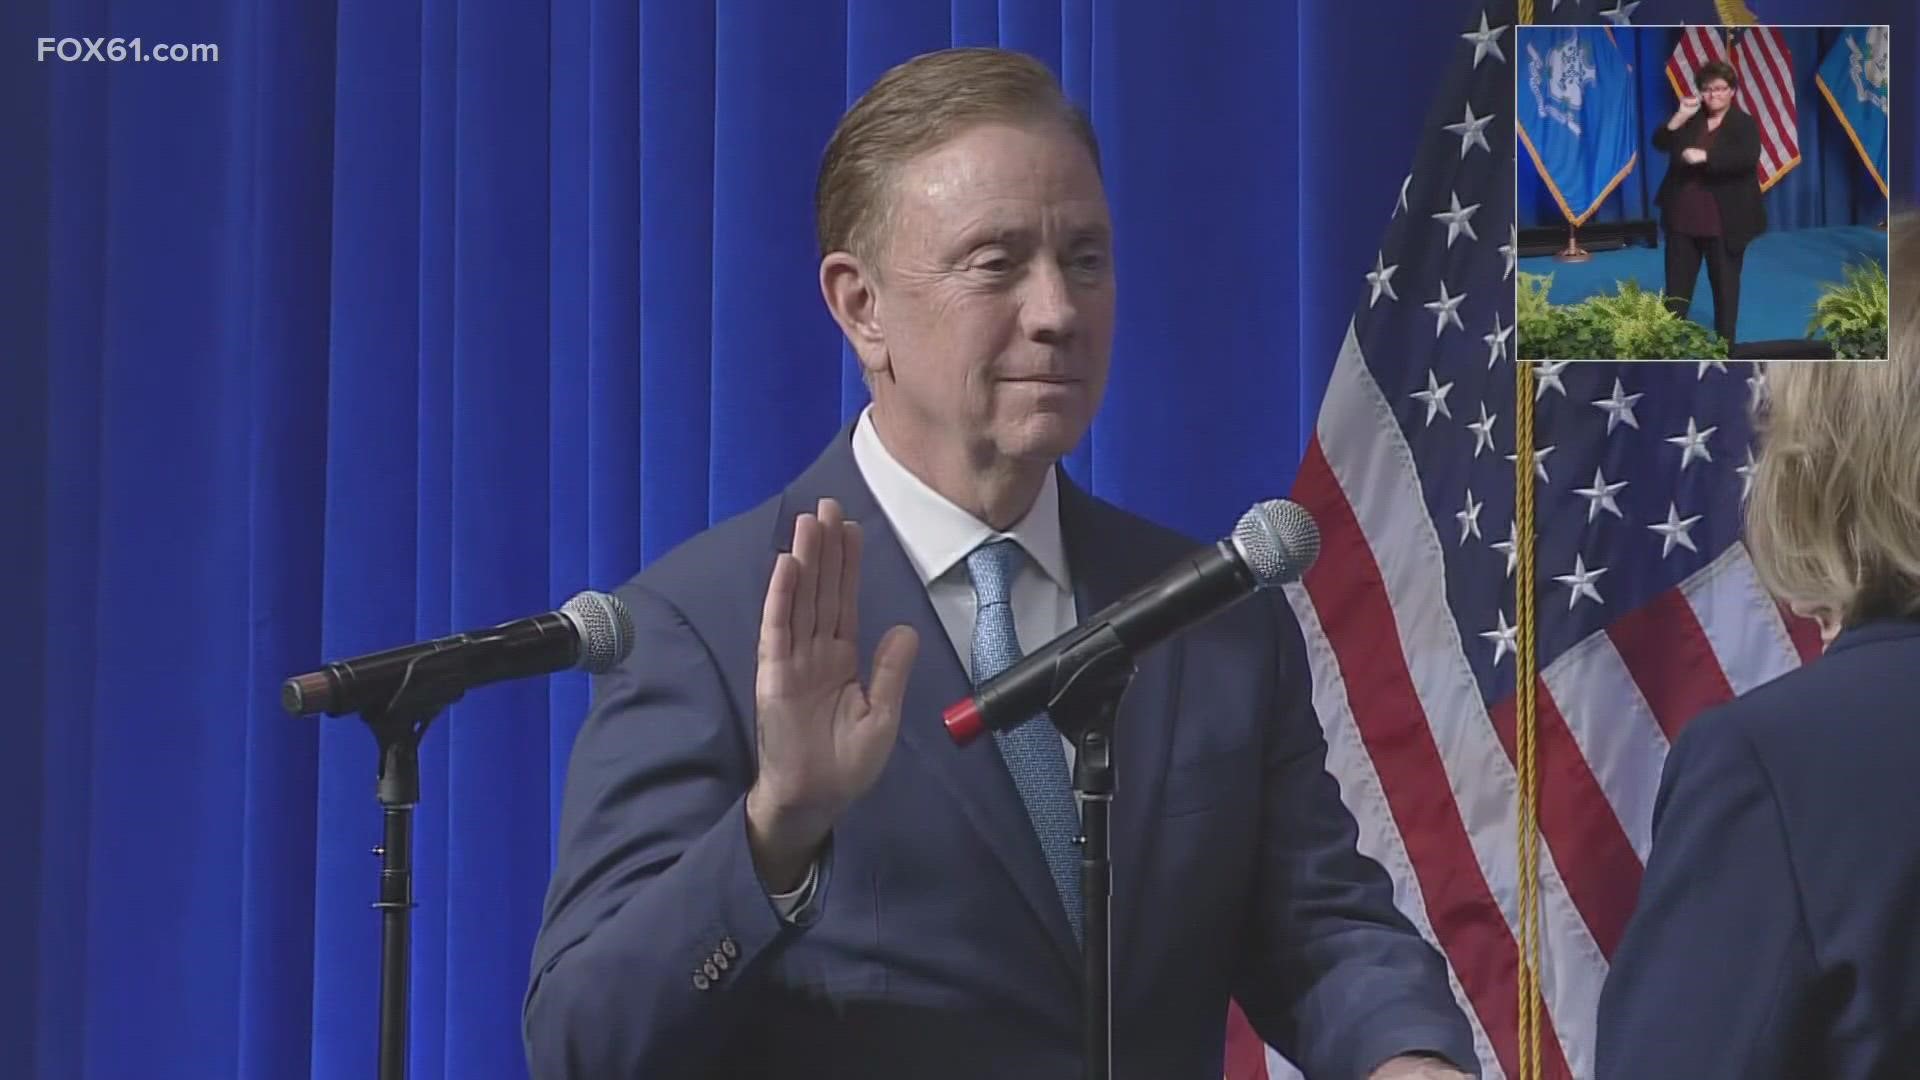 Lamont highlighted growth and opportunity in Connecticut during his speech.